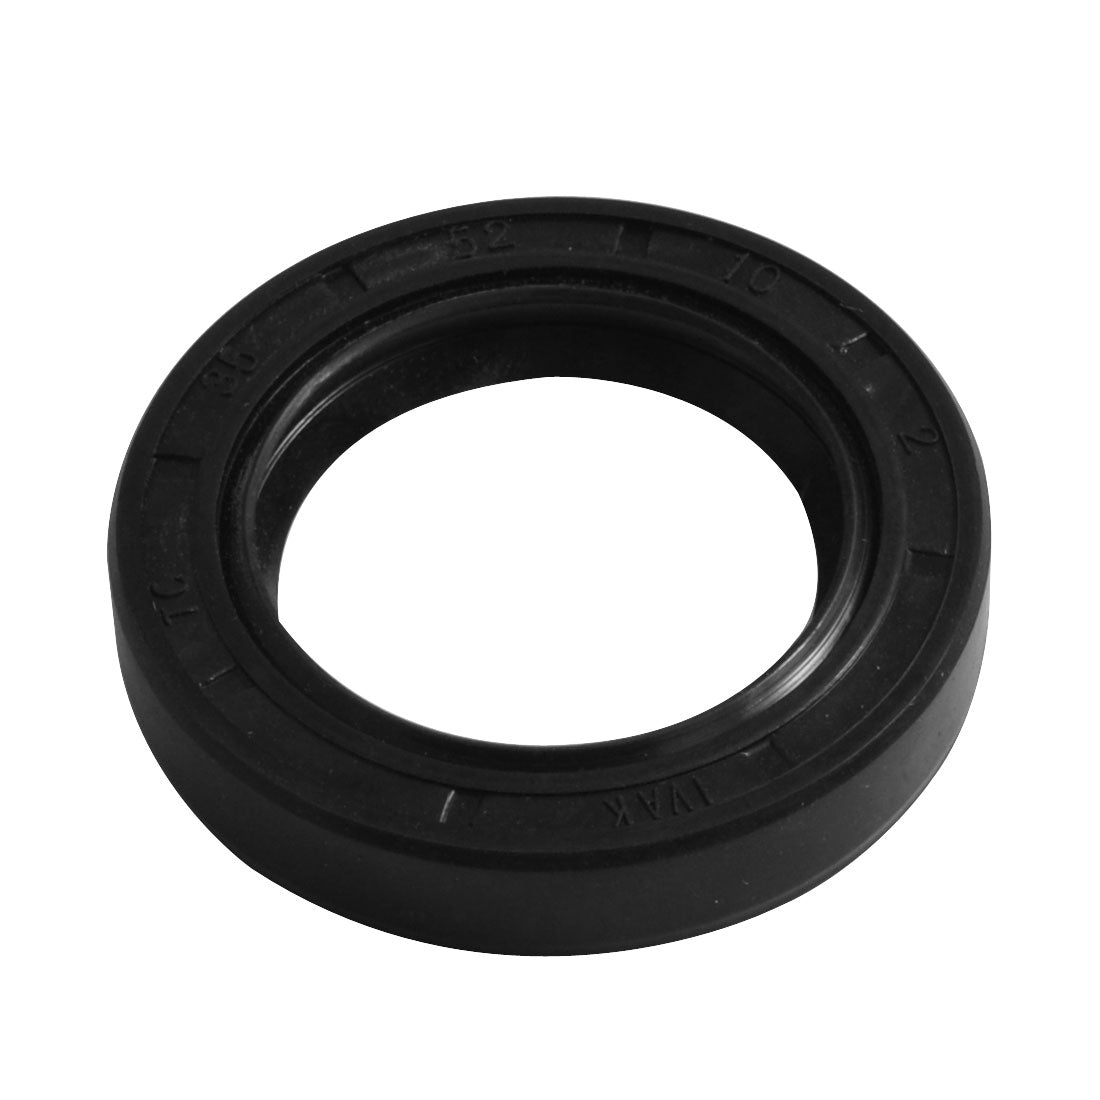 Uxcell Uxcell 110mmx85mmx10mm Machine Rubber Oil Seal Sealing Ring Gasket Washer Black